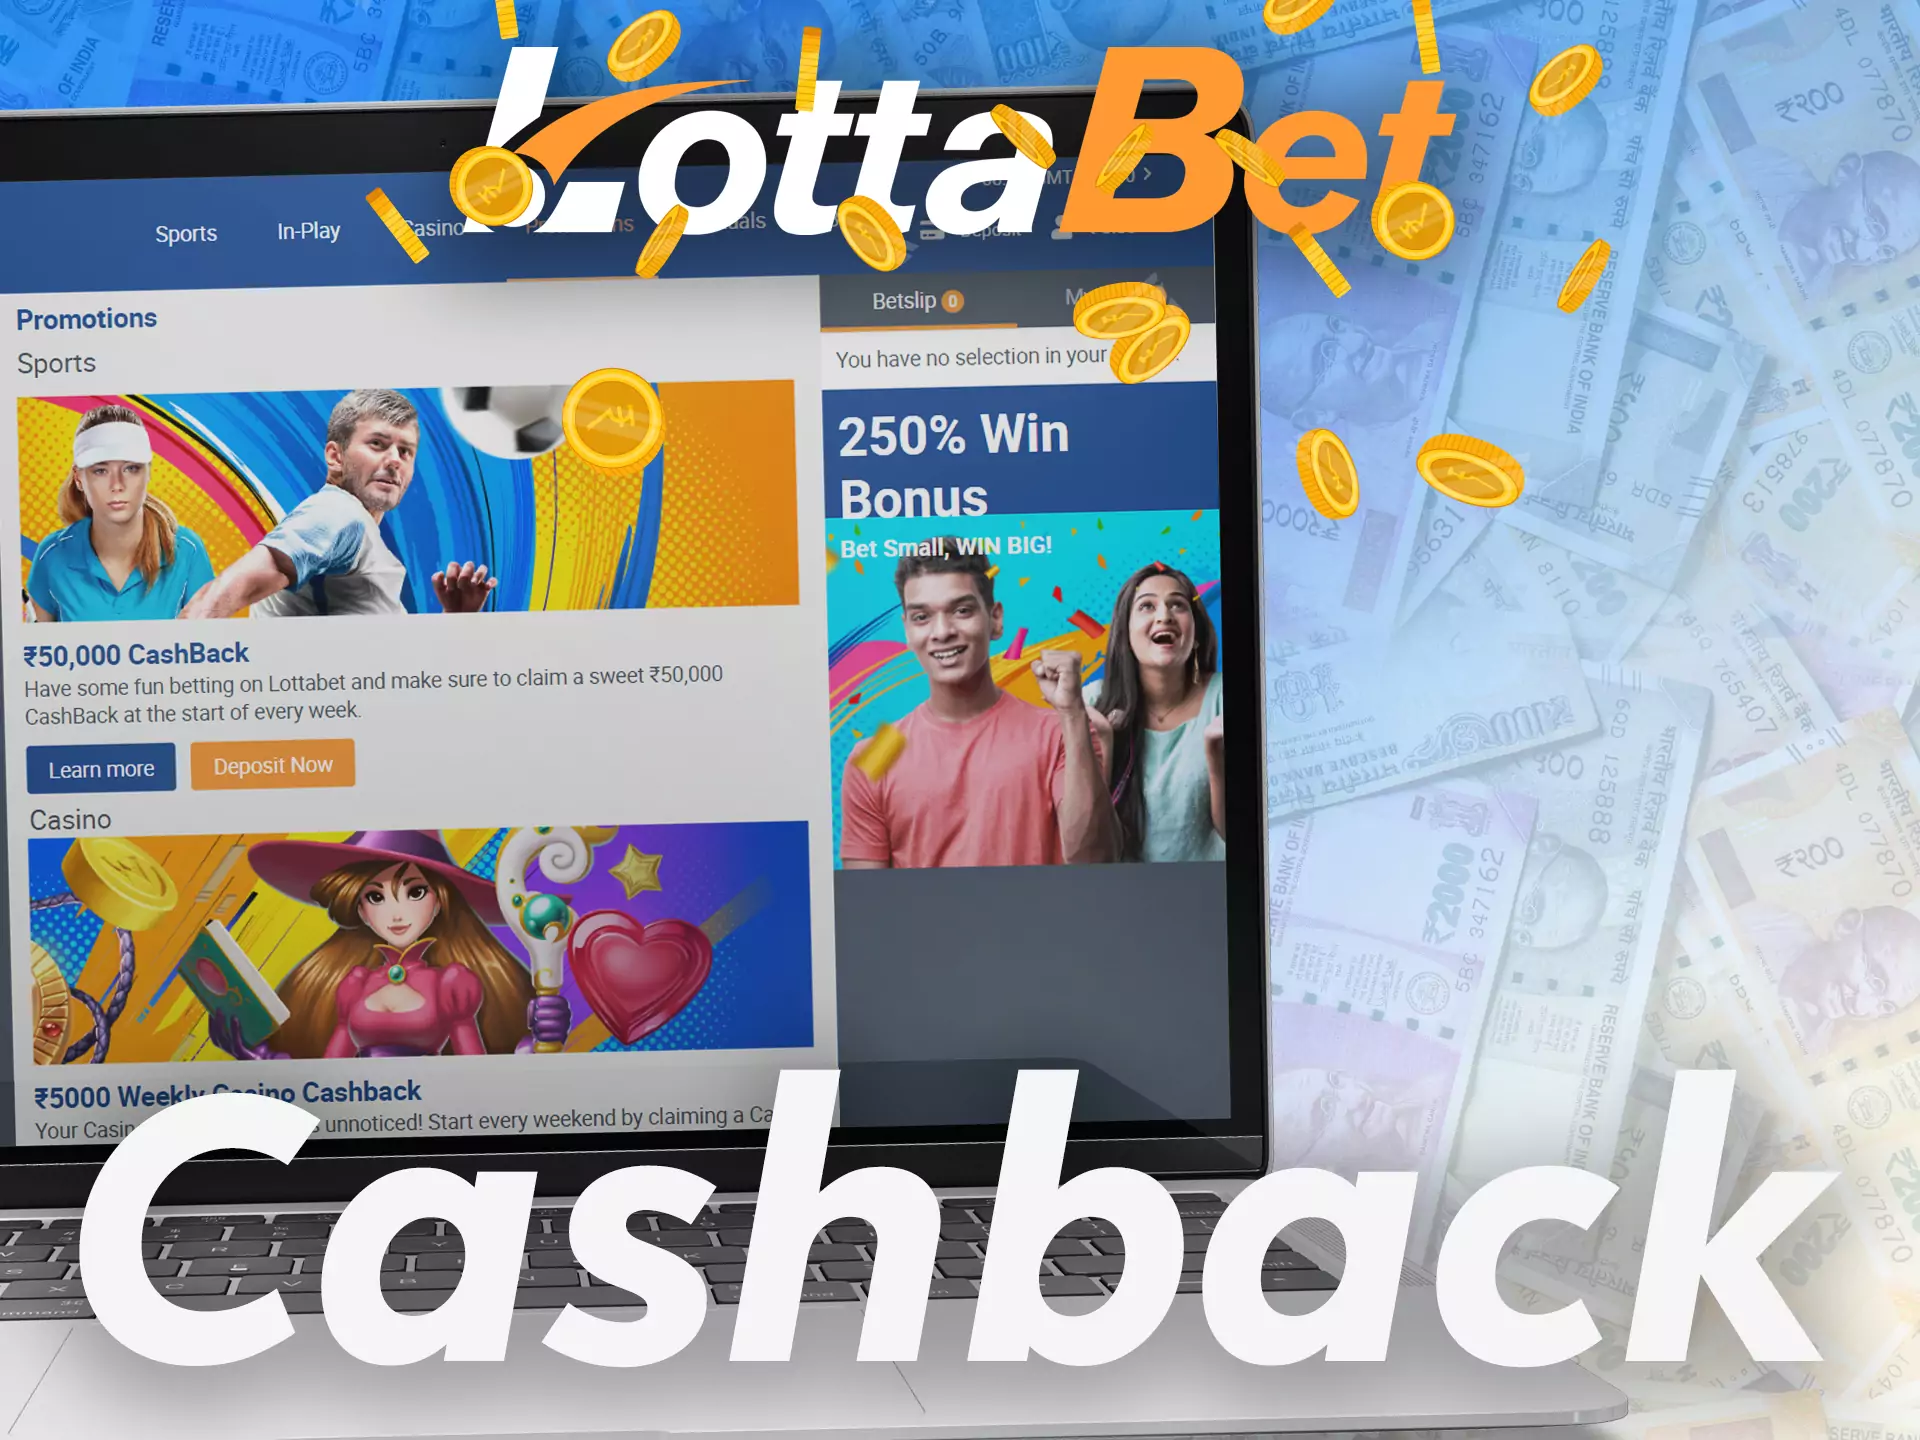 While betting on cricket and other sports matches, you can get a cashback from Lottabet.